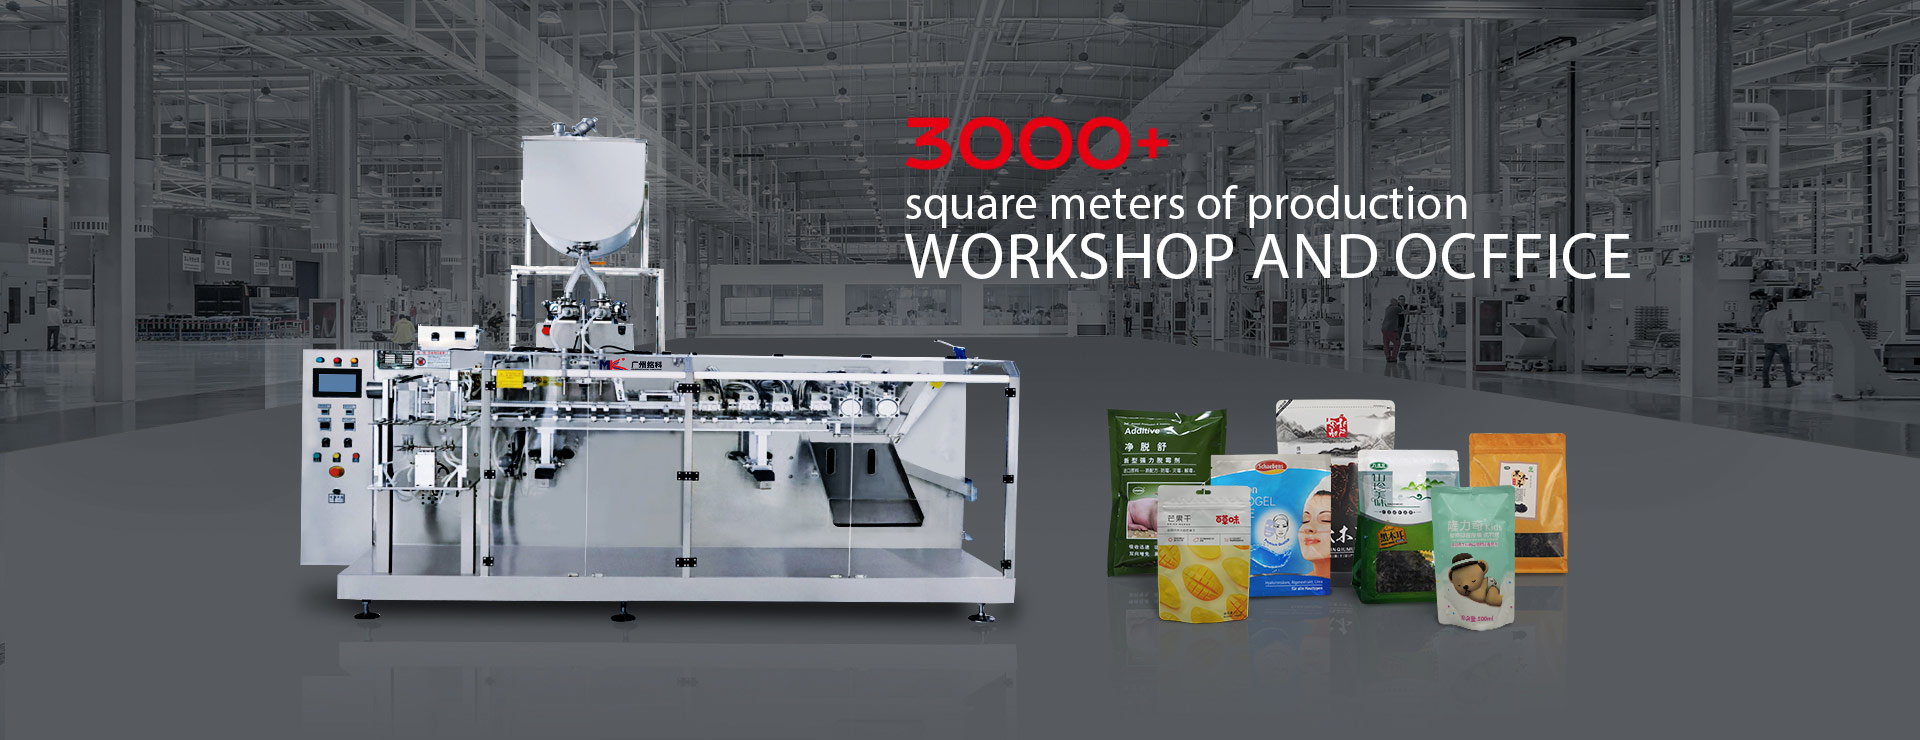 3000+ square meters of production workshop and ocffice, 20000+ professional buyers served worldwide